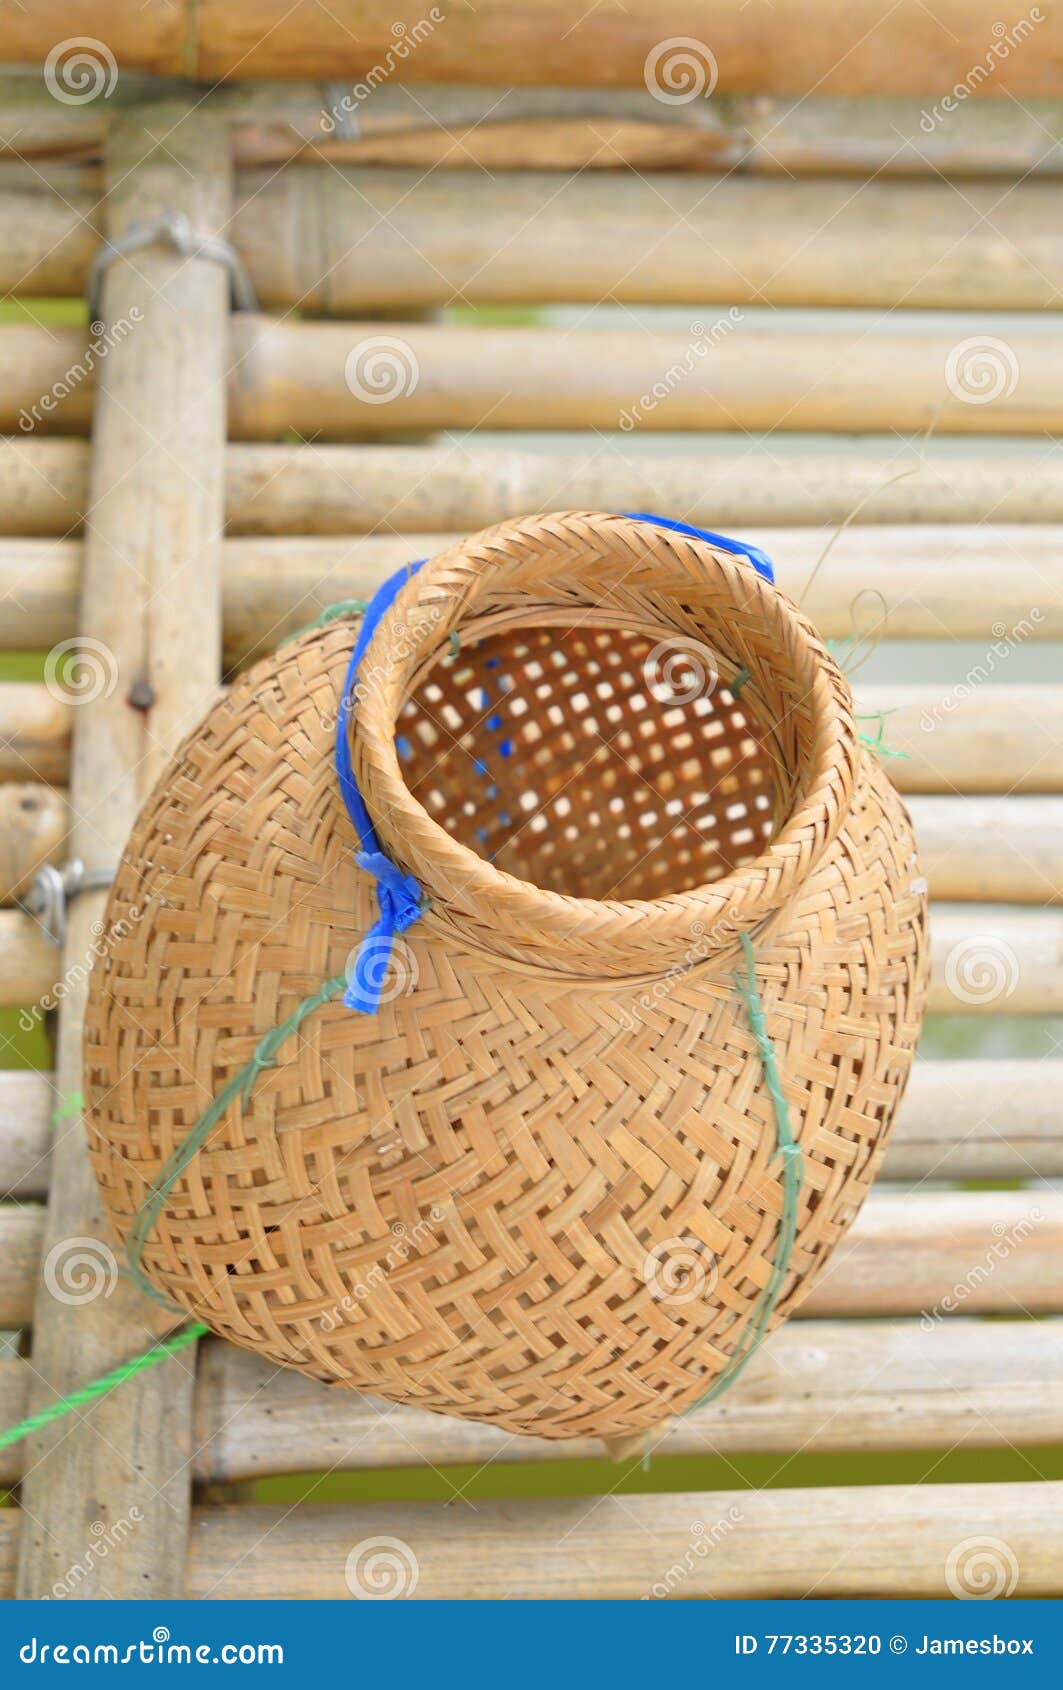 Fish trap basket stock photo. Image of accessory, commercial - 77335320